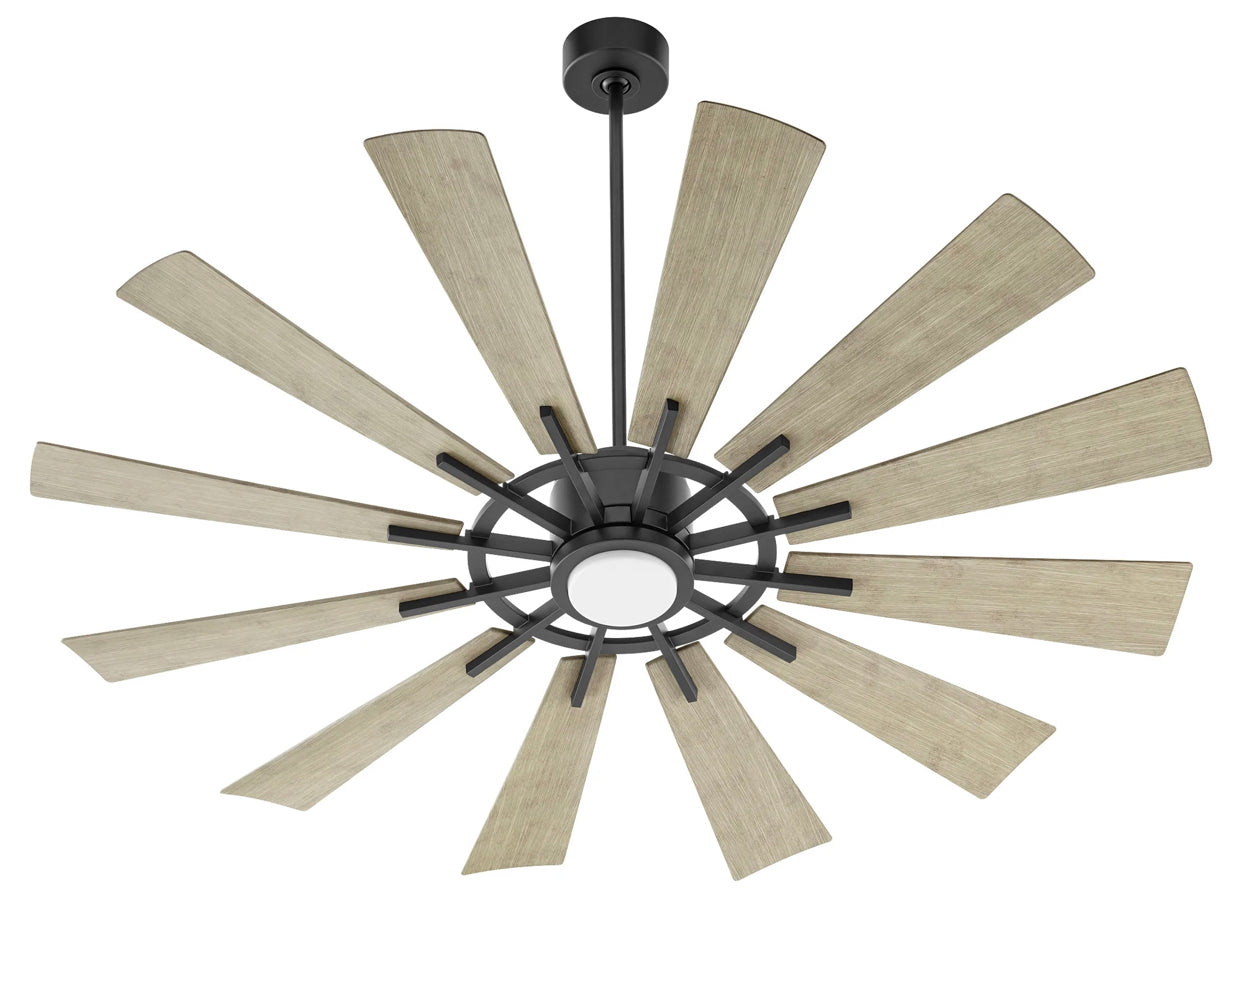 NEW! 60" Cirque Ceiling Fan DAMP Rated